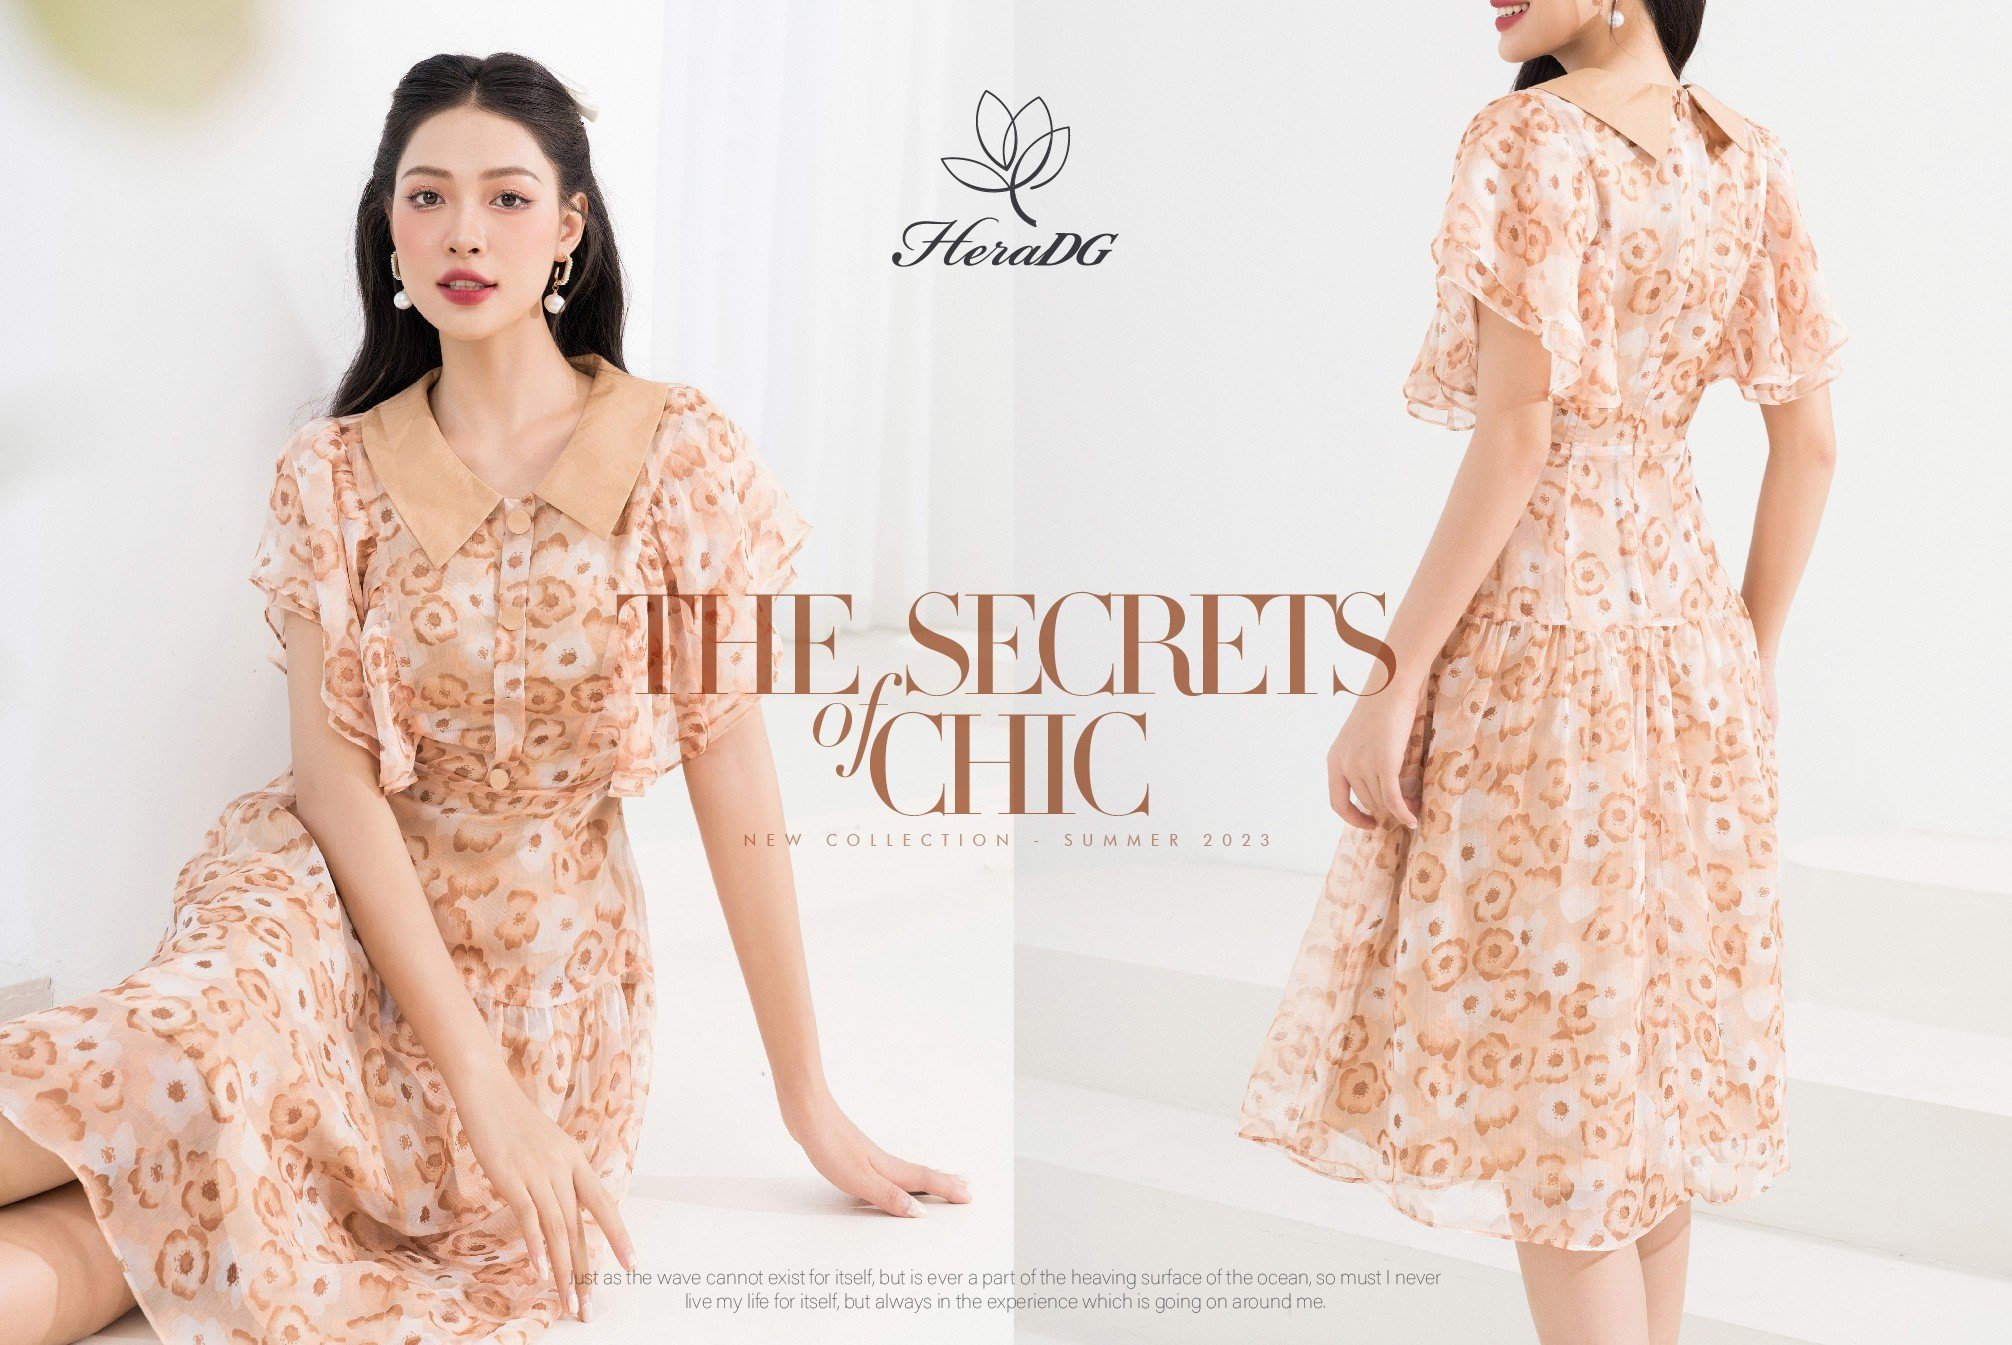 THE SECRETS OF CHIC